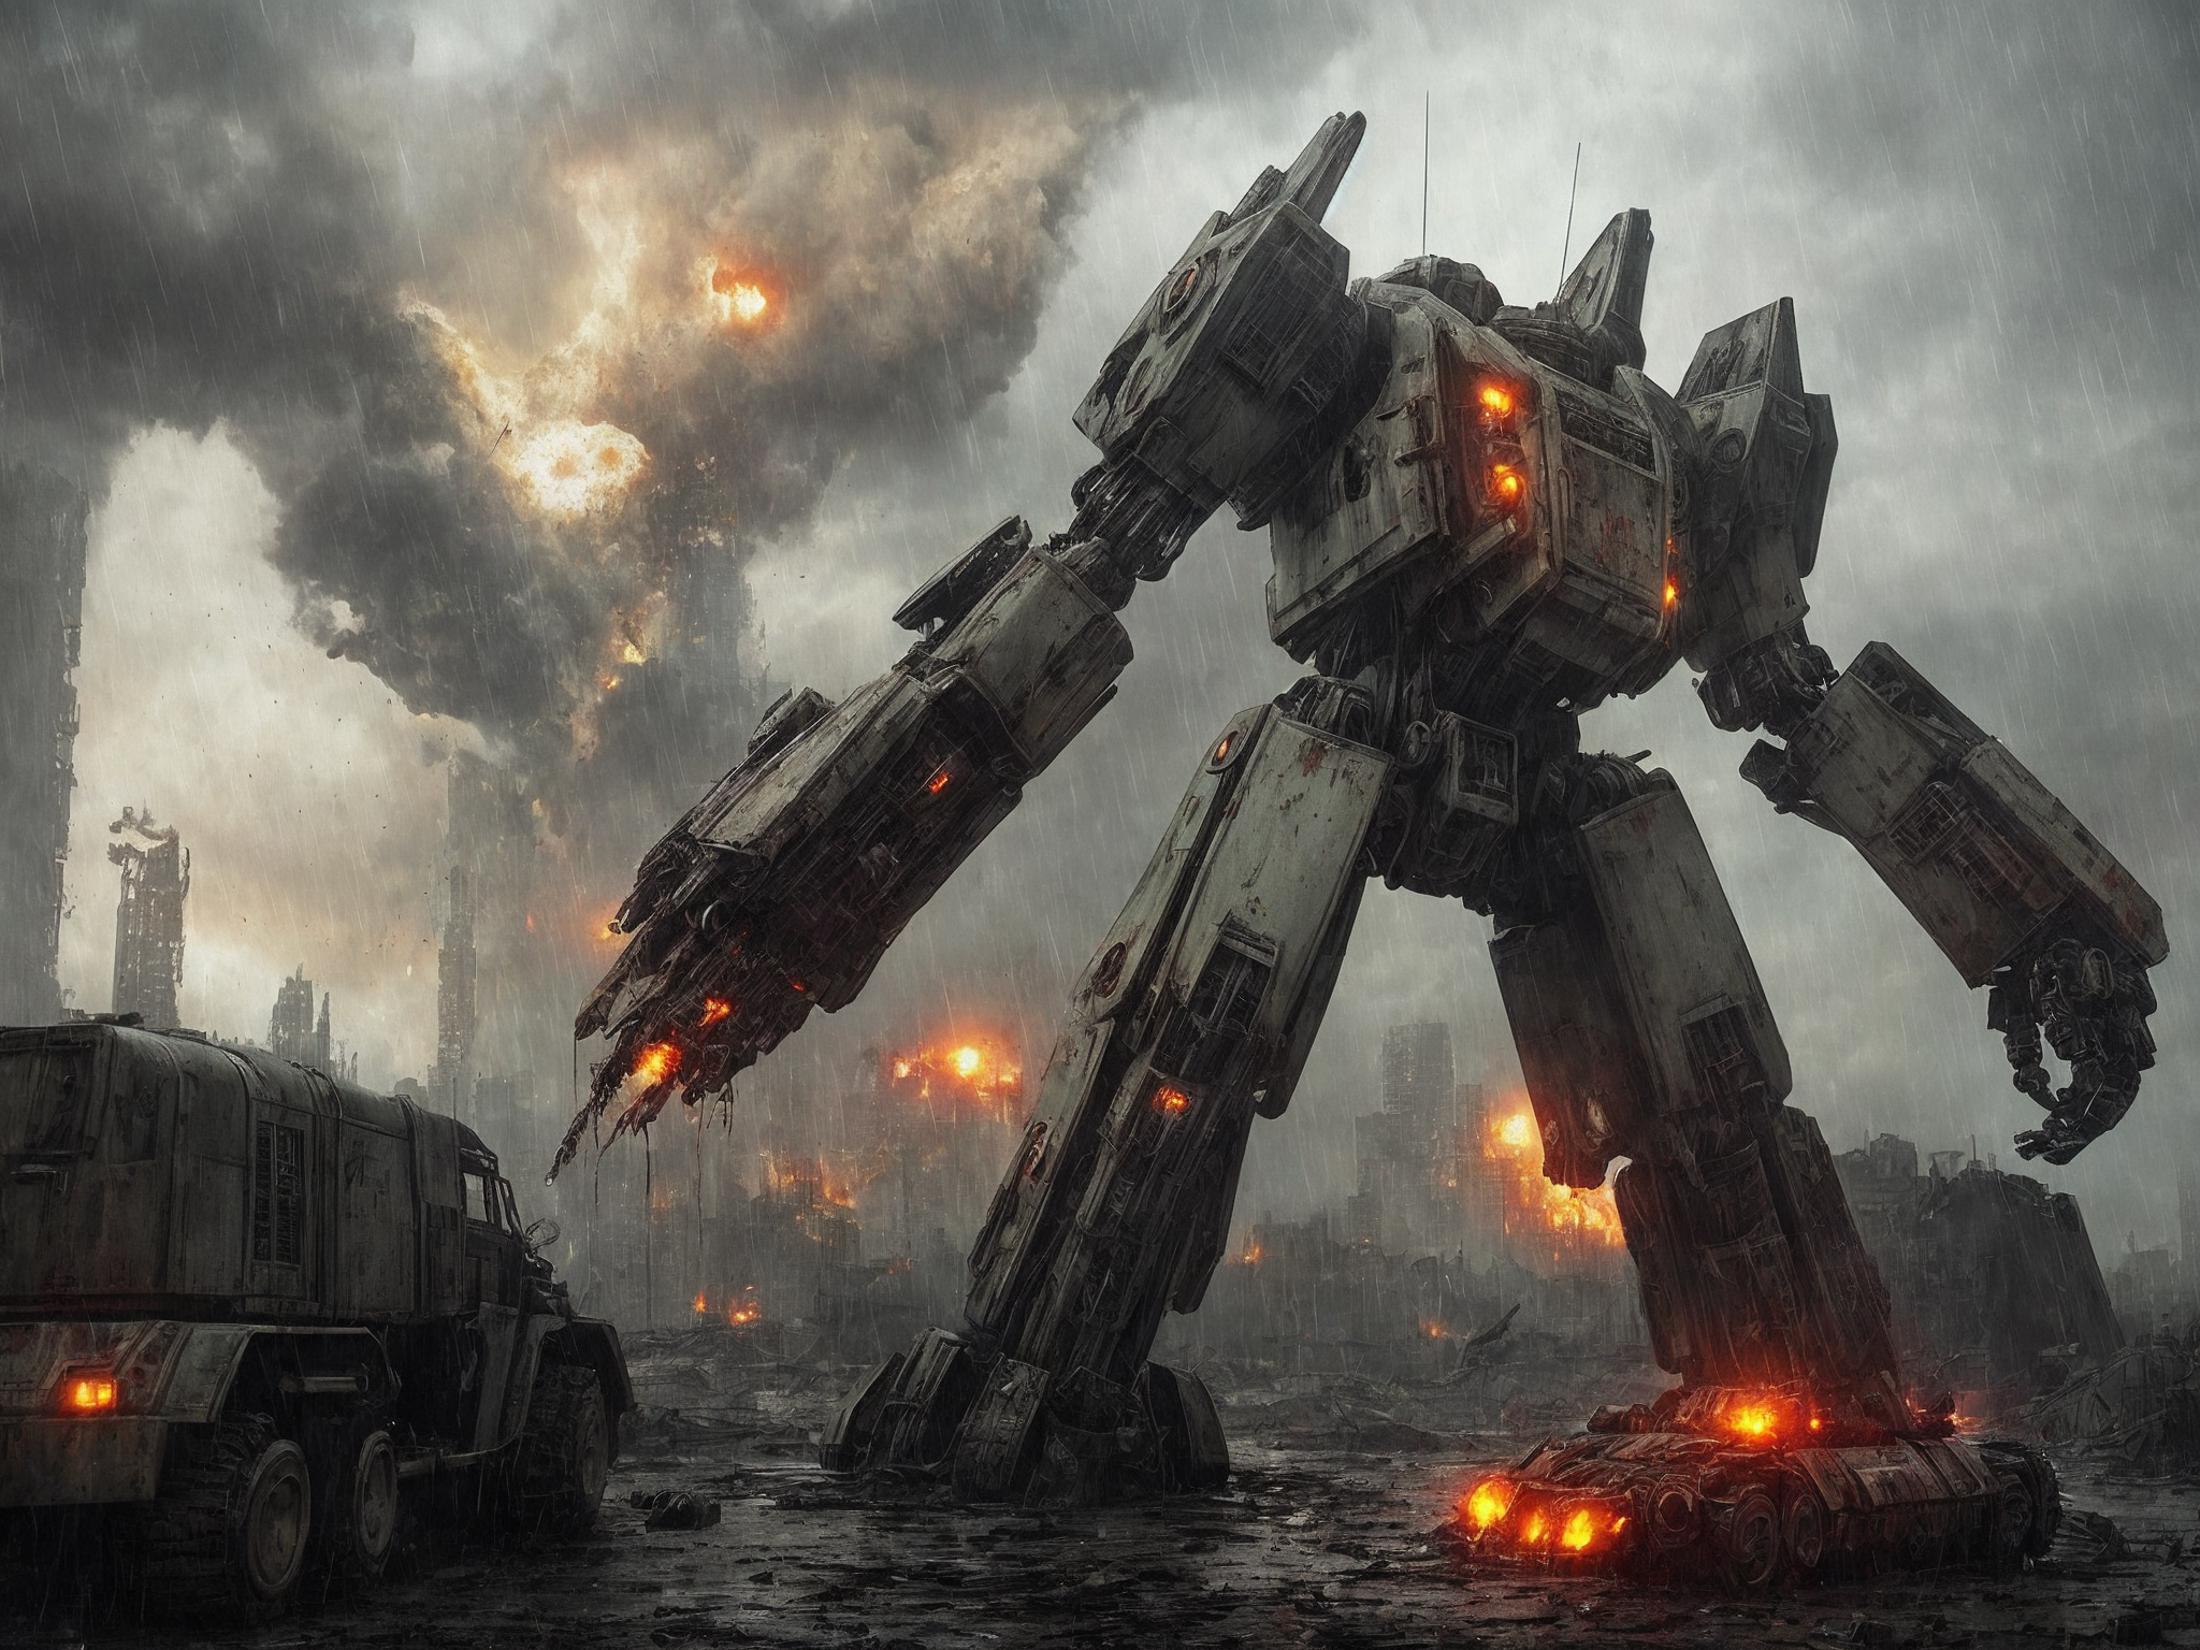 A massive robot with a tank on its back stands in a post-apocalyptic landscape.